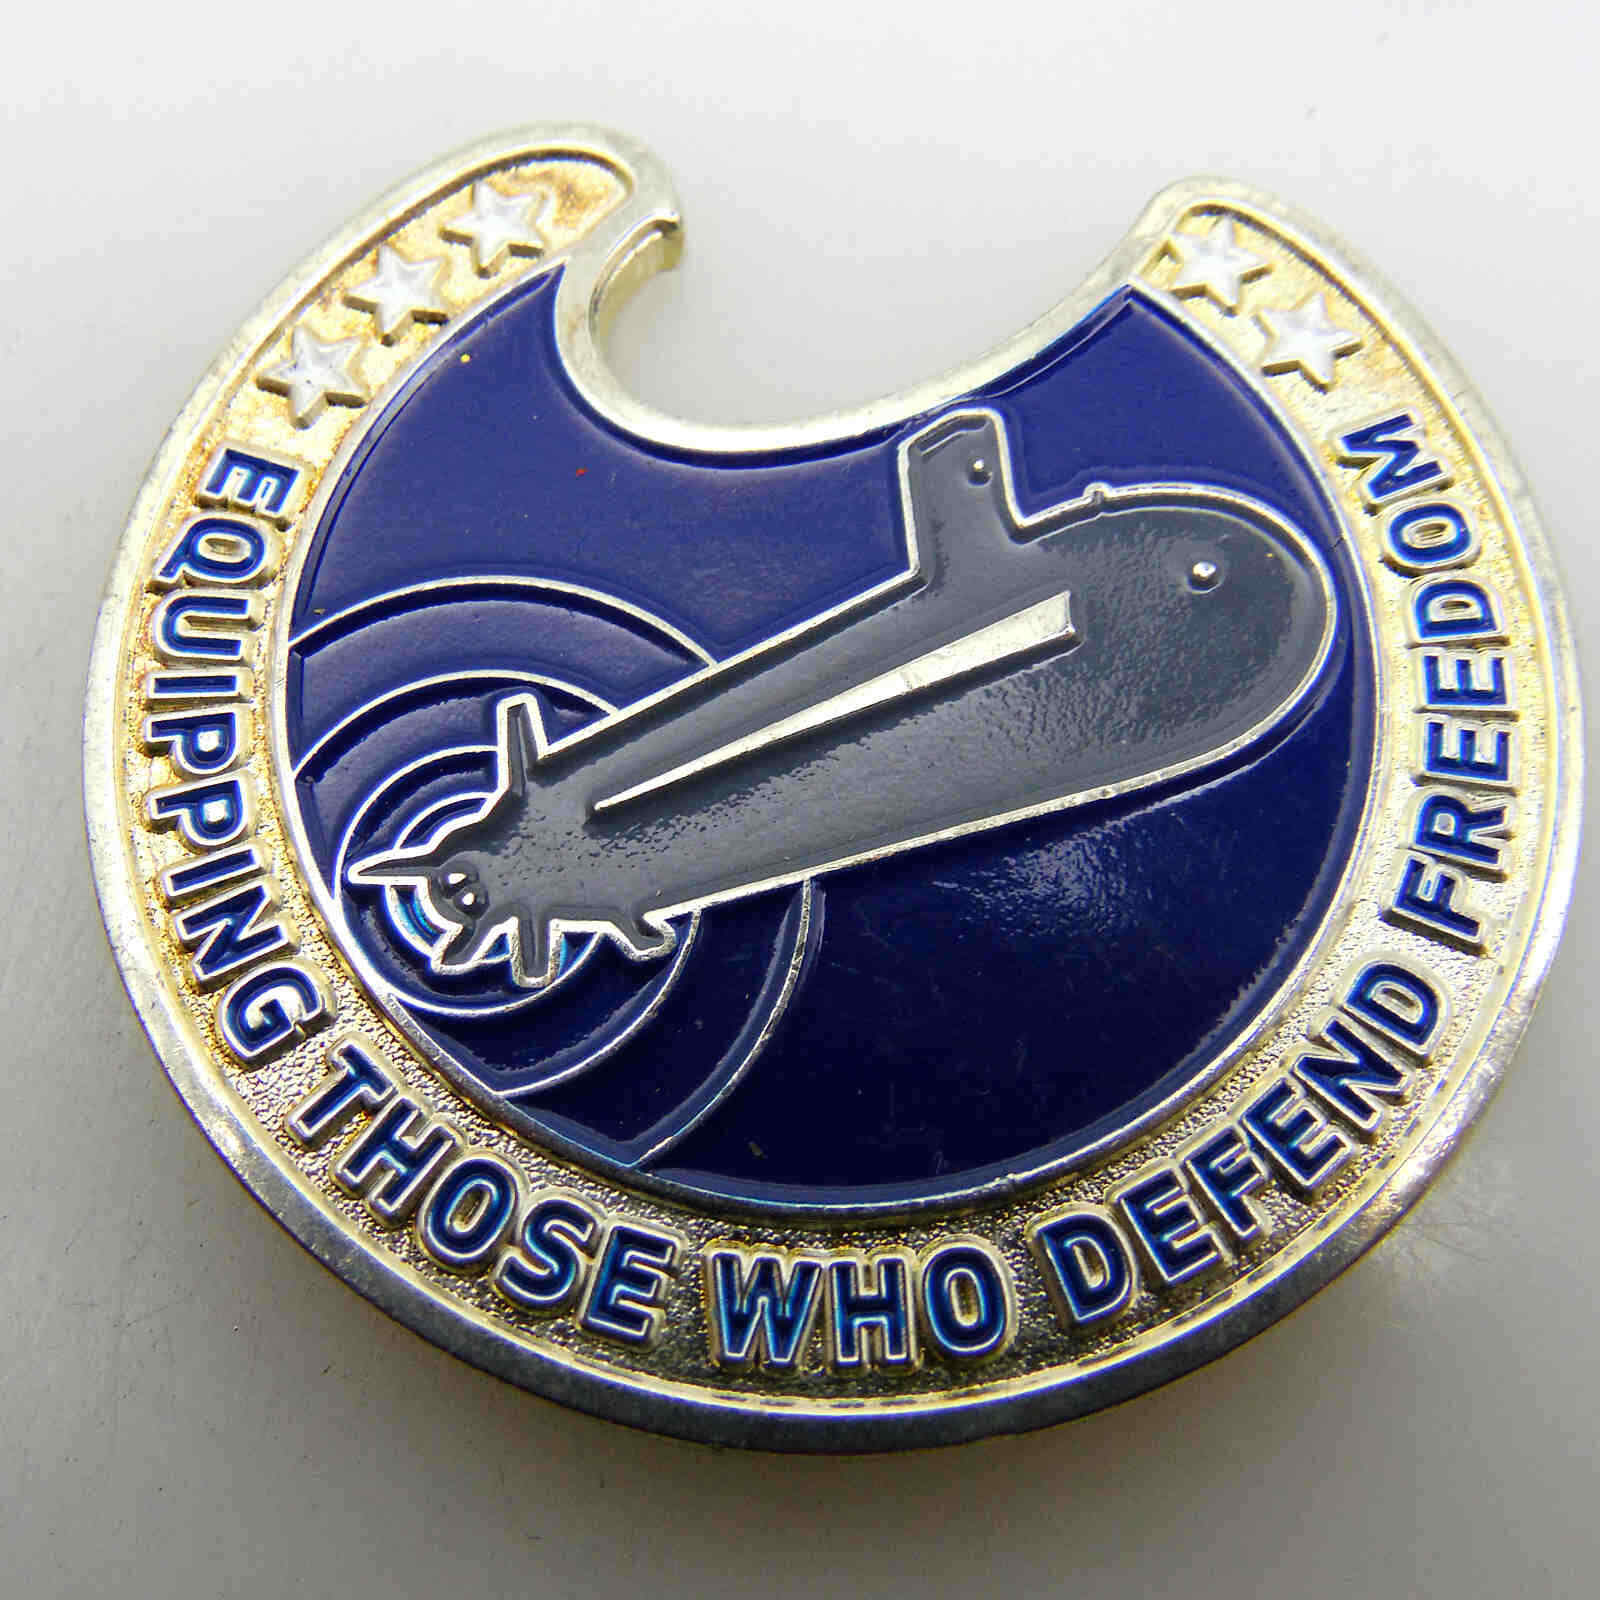 MOOG WHEN PERFORMANCE REALLY MATTERS CHALLENGE COIN